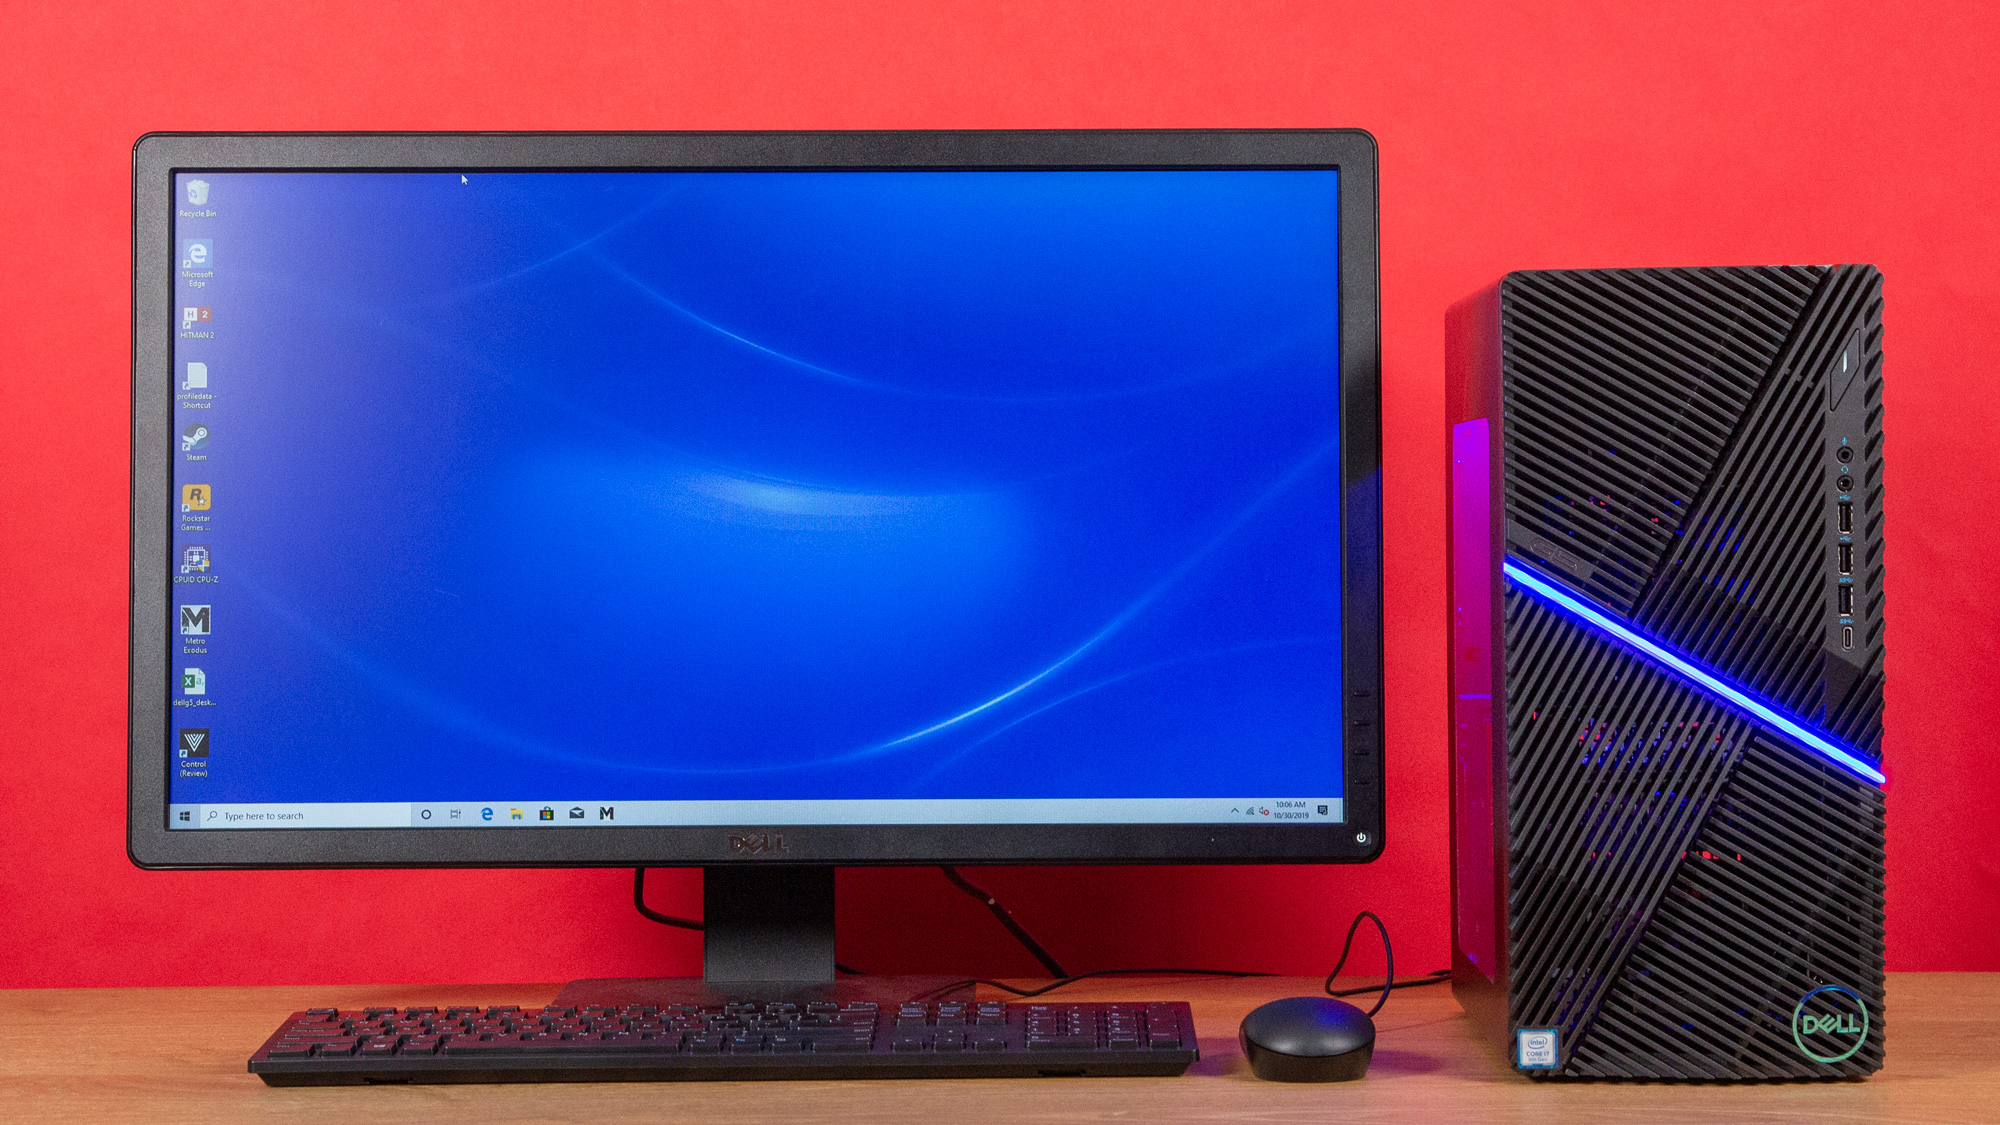 Dell G5 5090 Review: A Solid Budget Gaming PC With Tons of Options